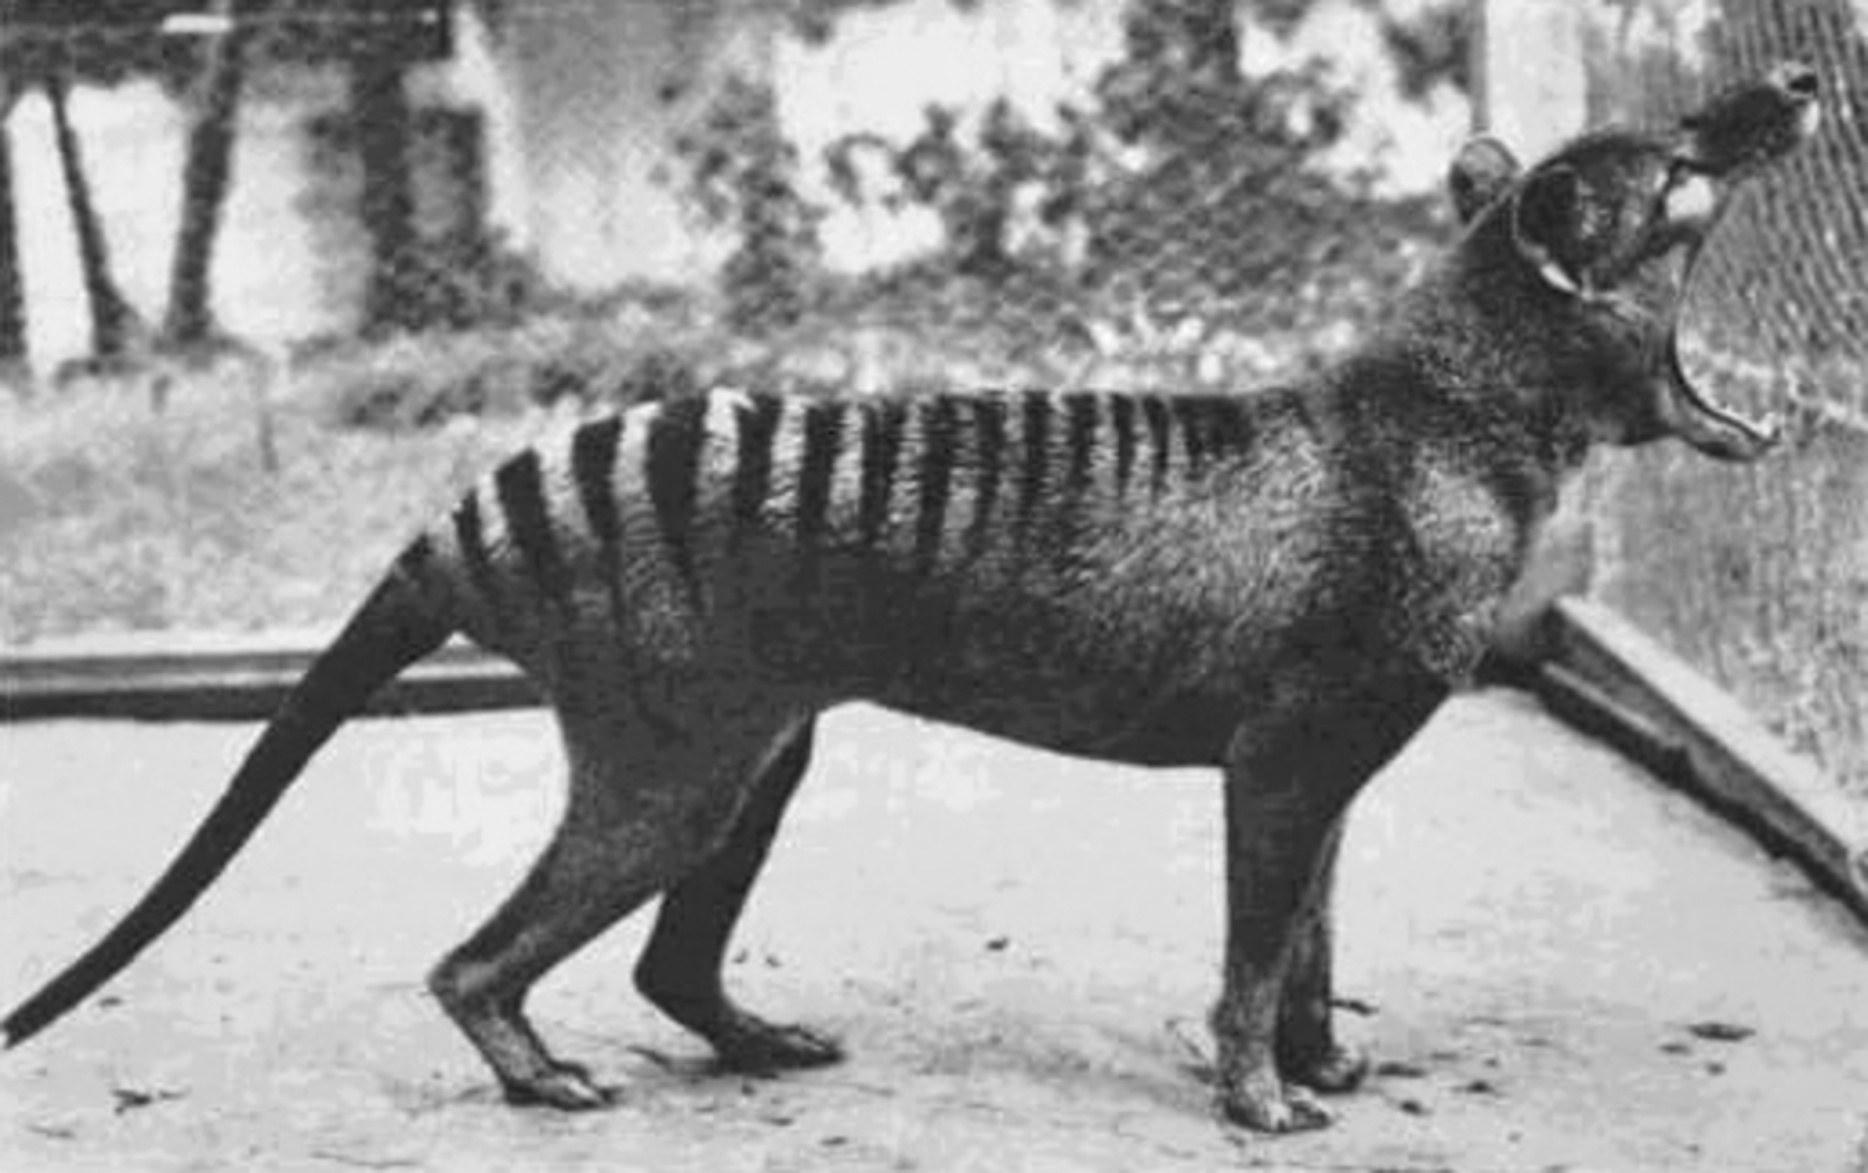 The thylacine could open its jaws to an unusual extent: up to 80 degrees.